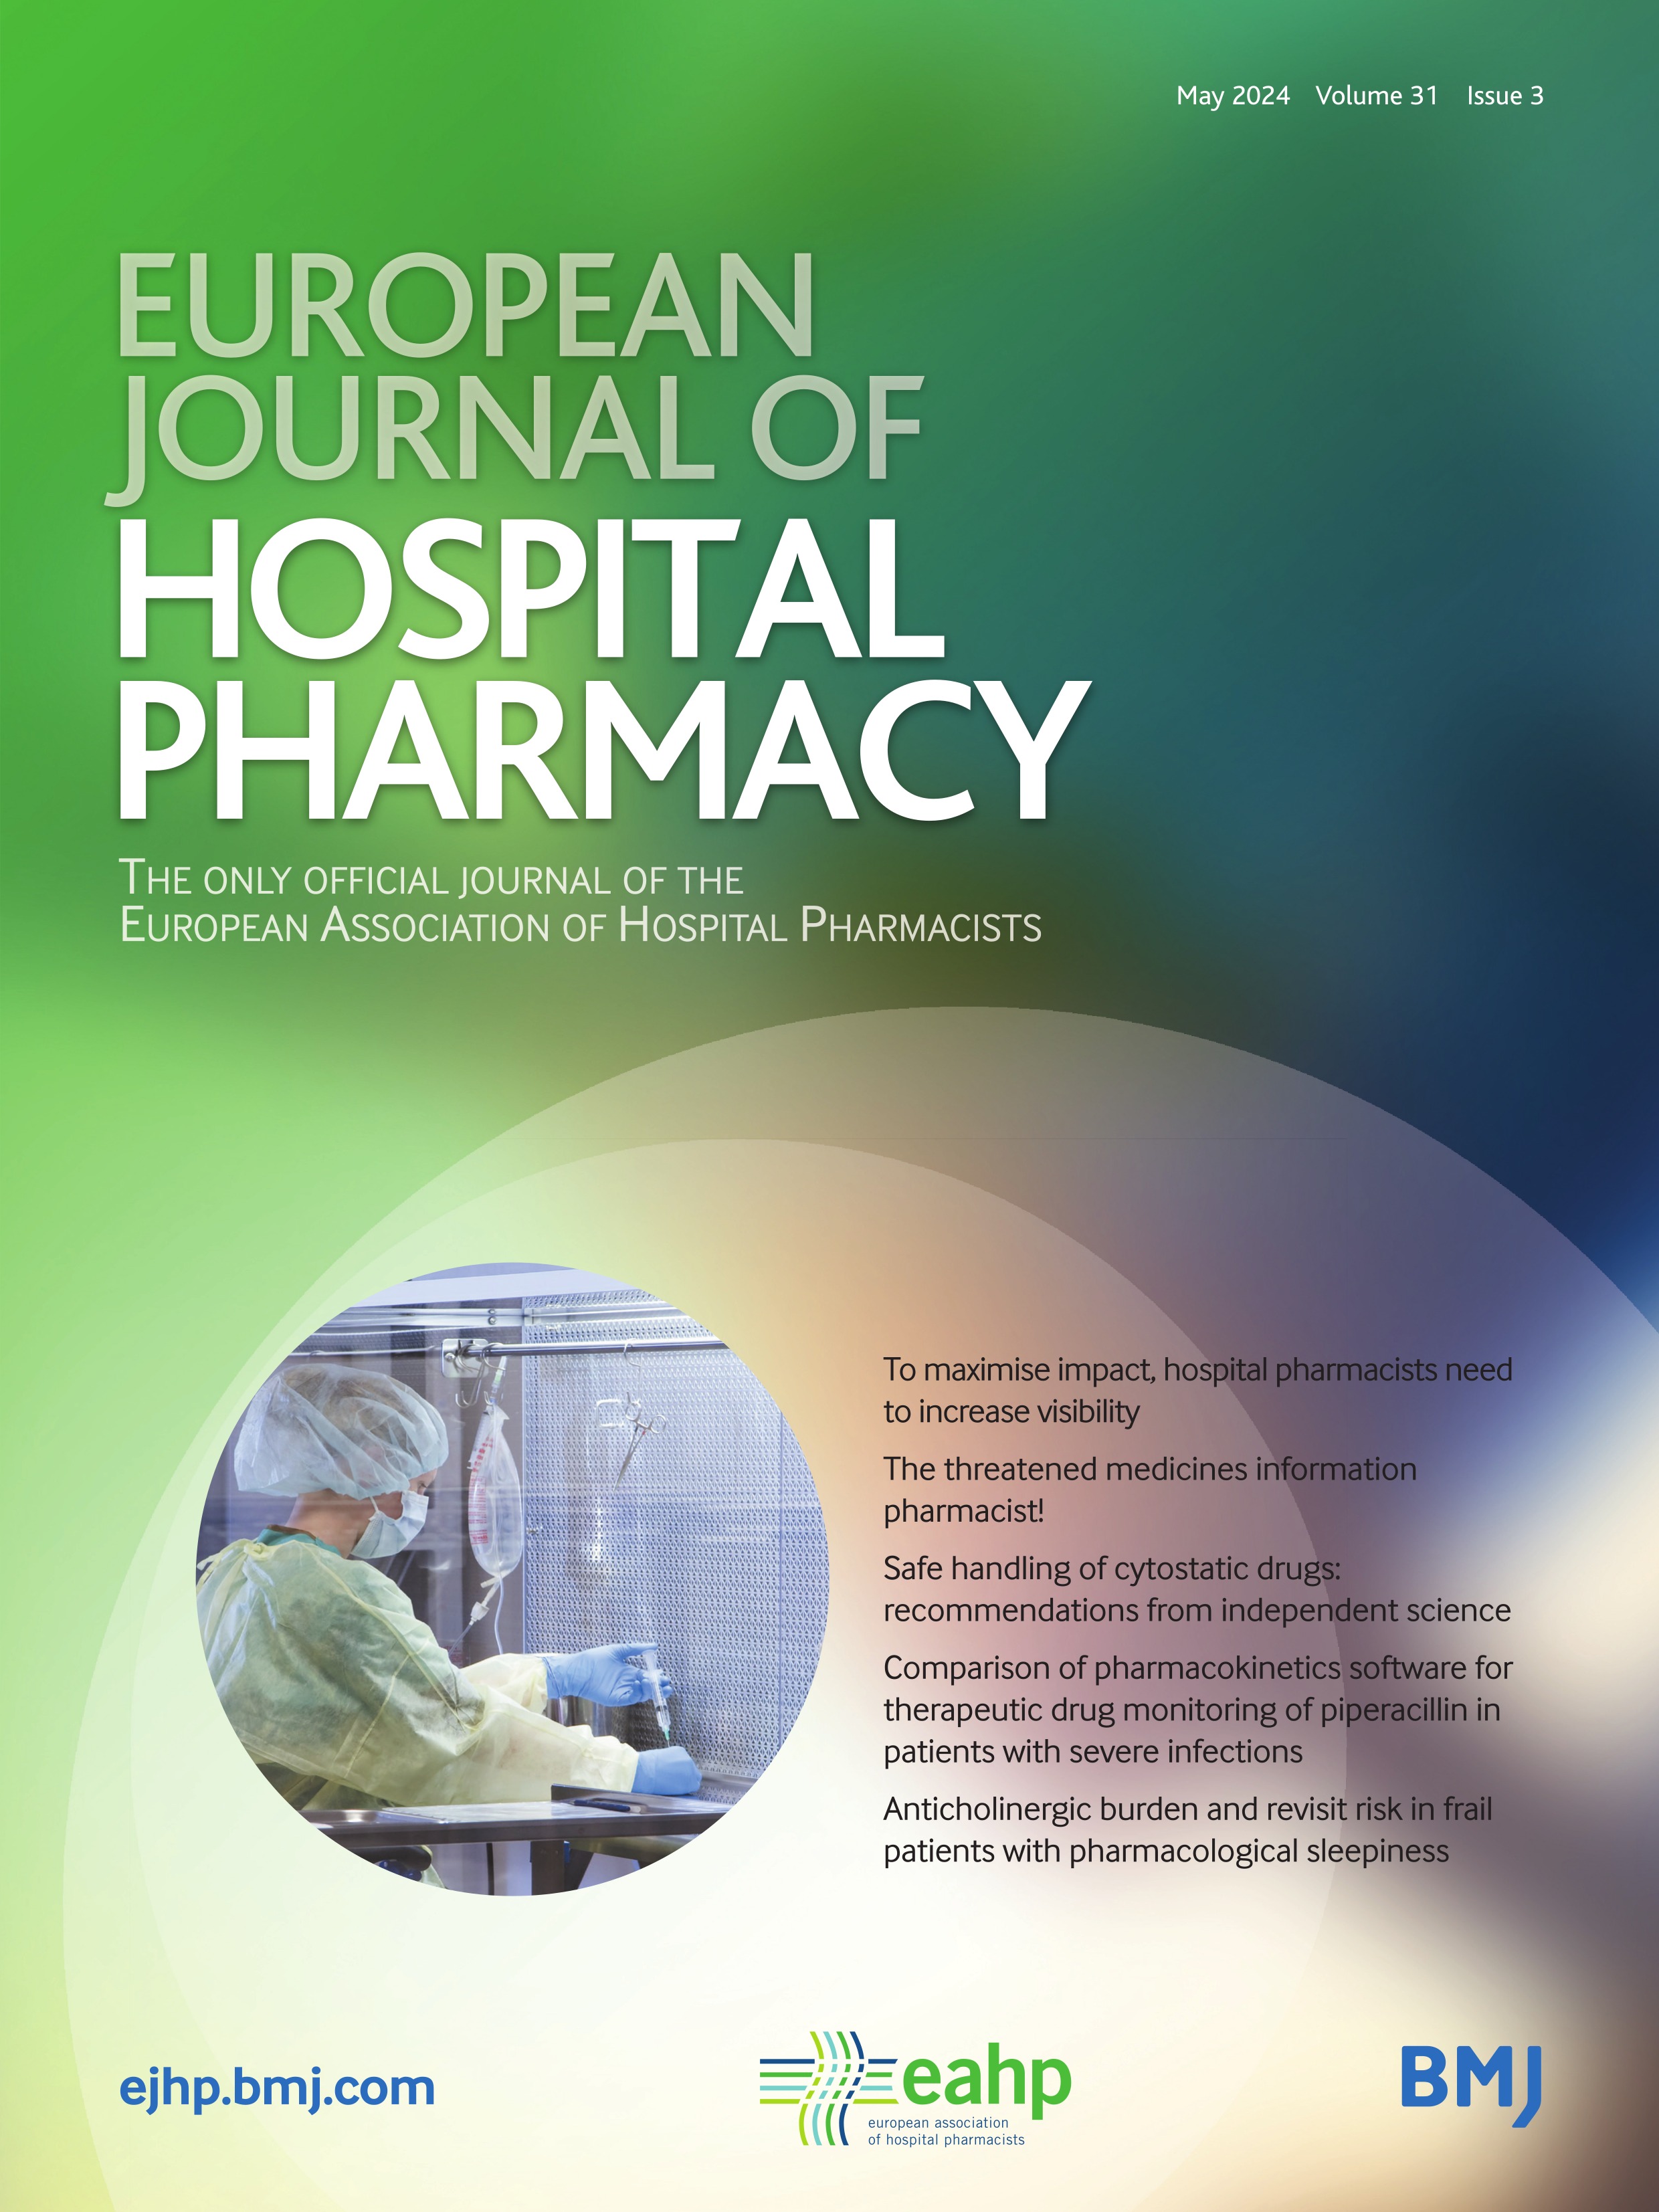 Use of chronic medications and risk of death due to COVID-19 in hospitalised patients